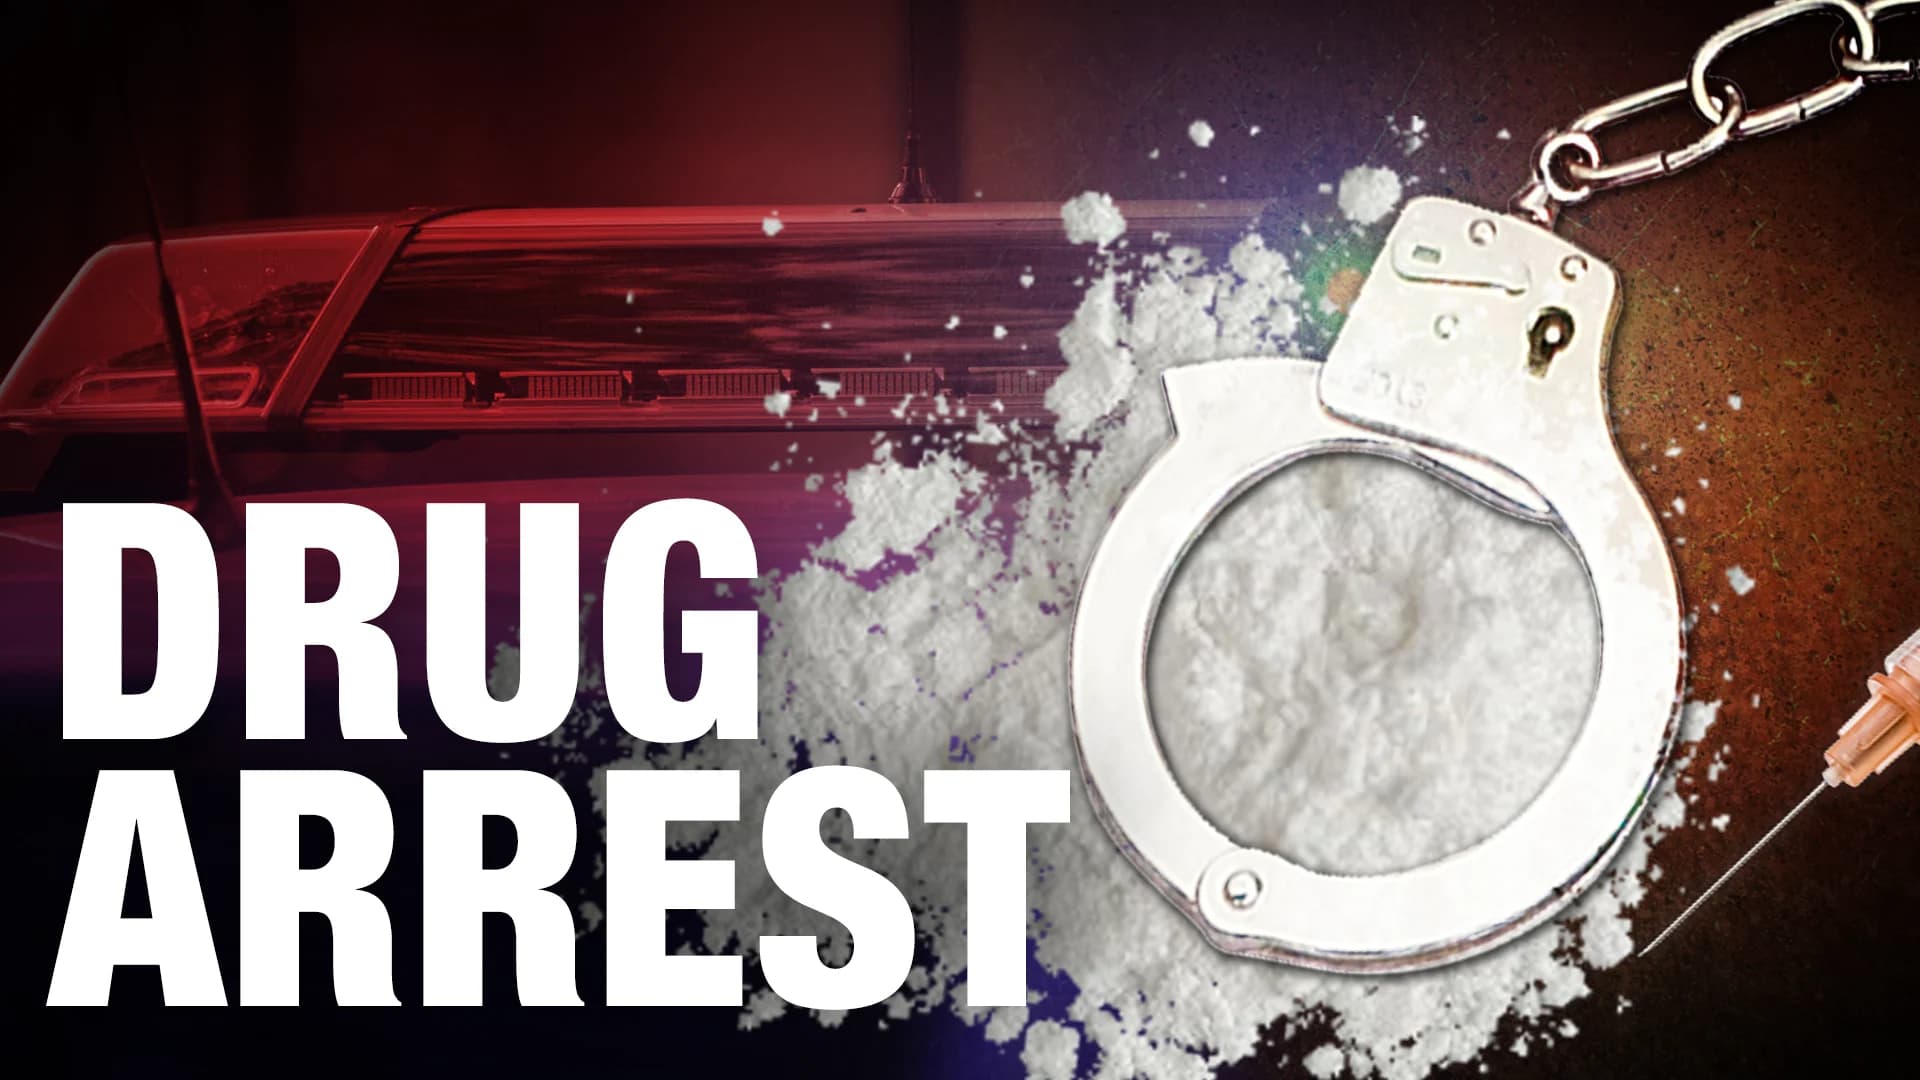 6 Rockland County residents arrested in narcotics bust